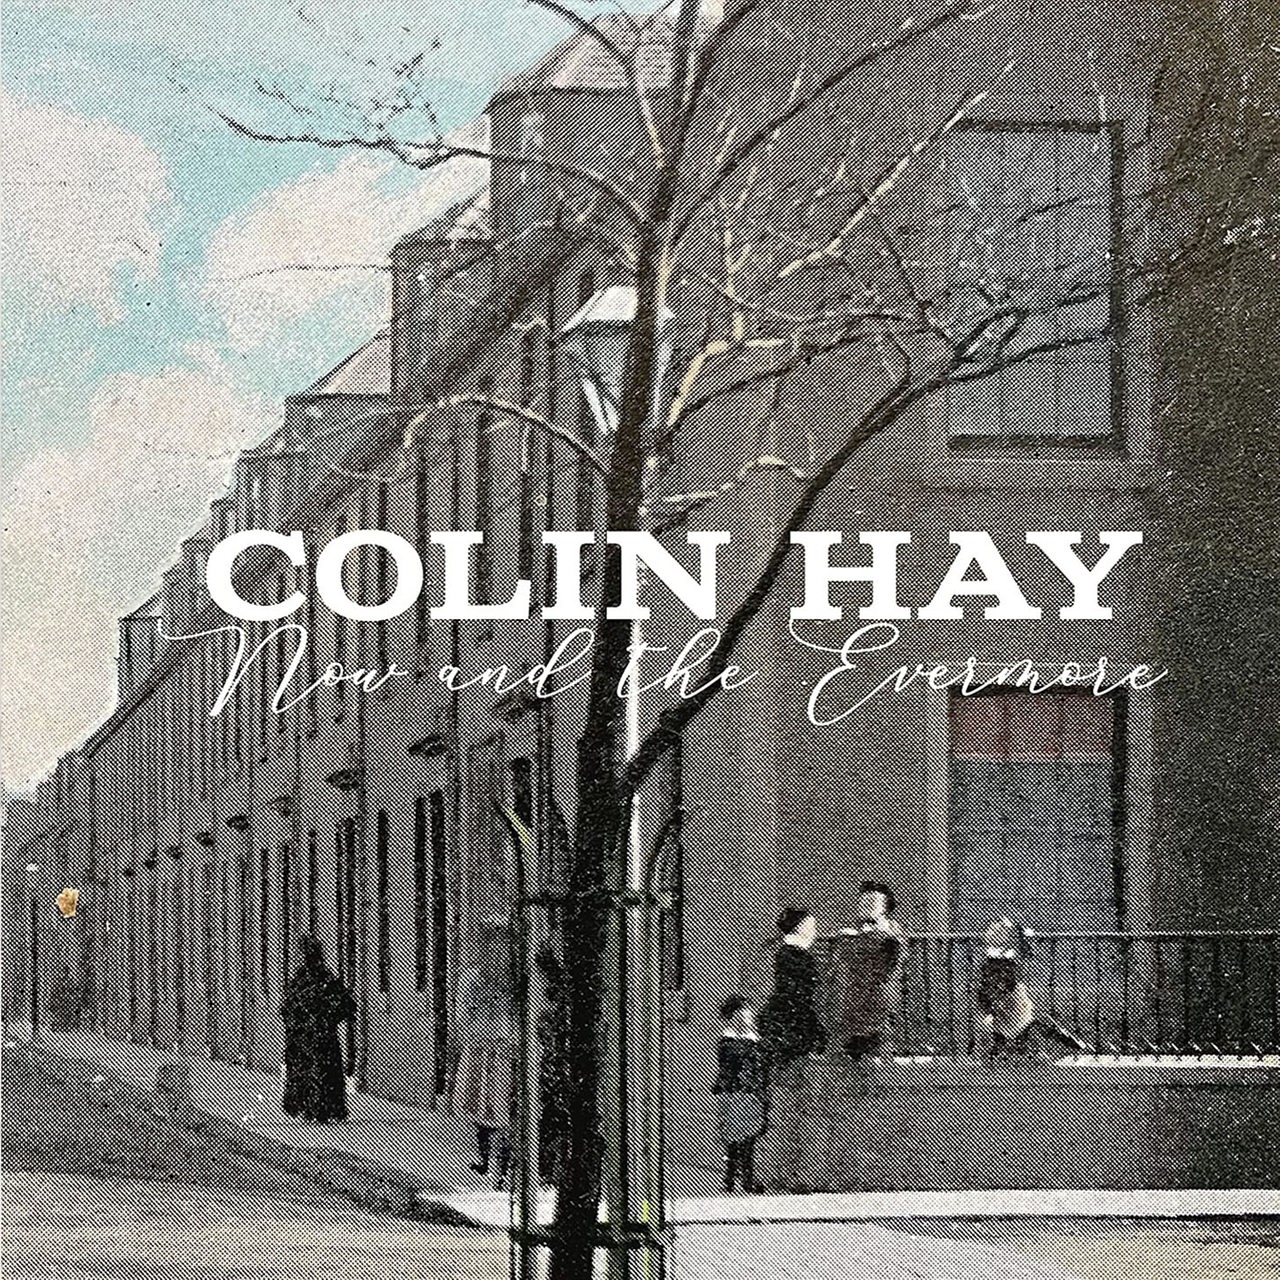 Albumcover Colin Hay "Now and the evermore"